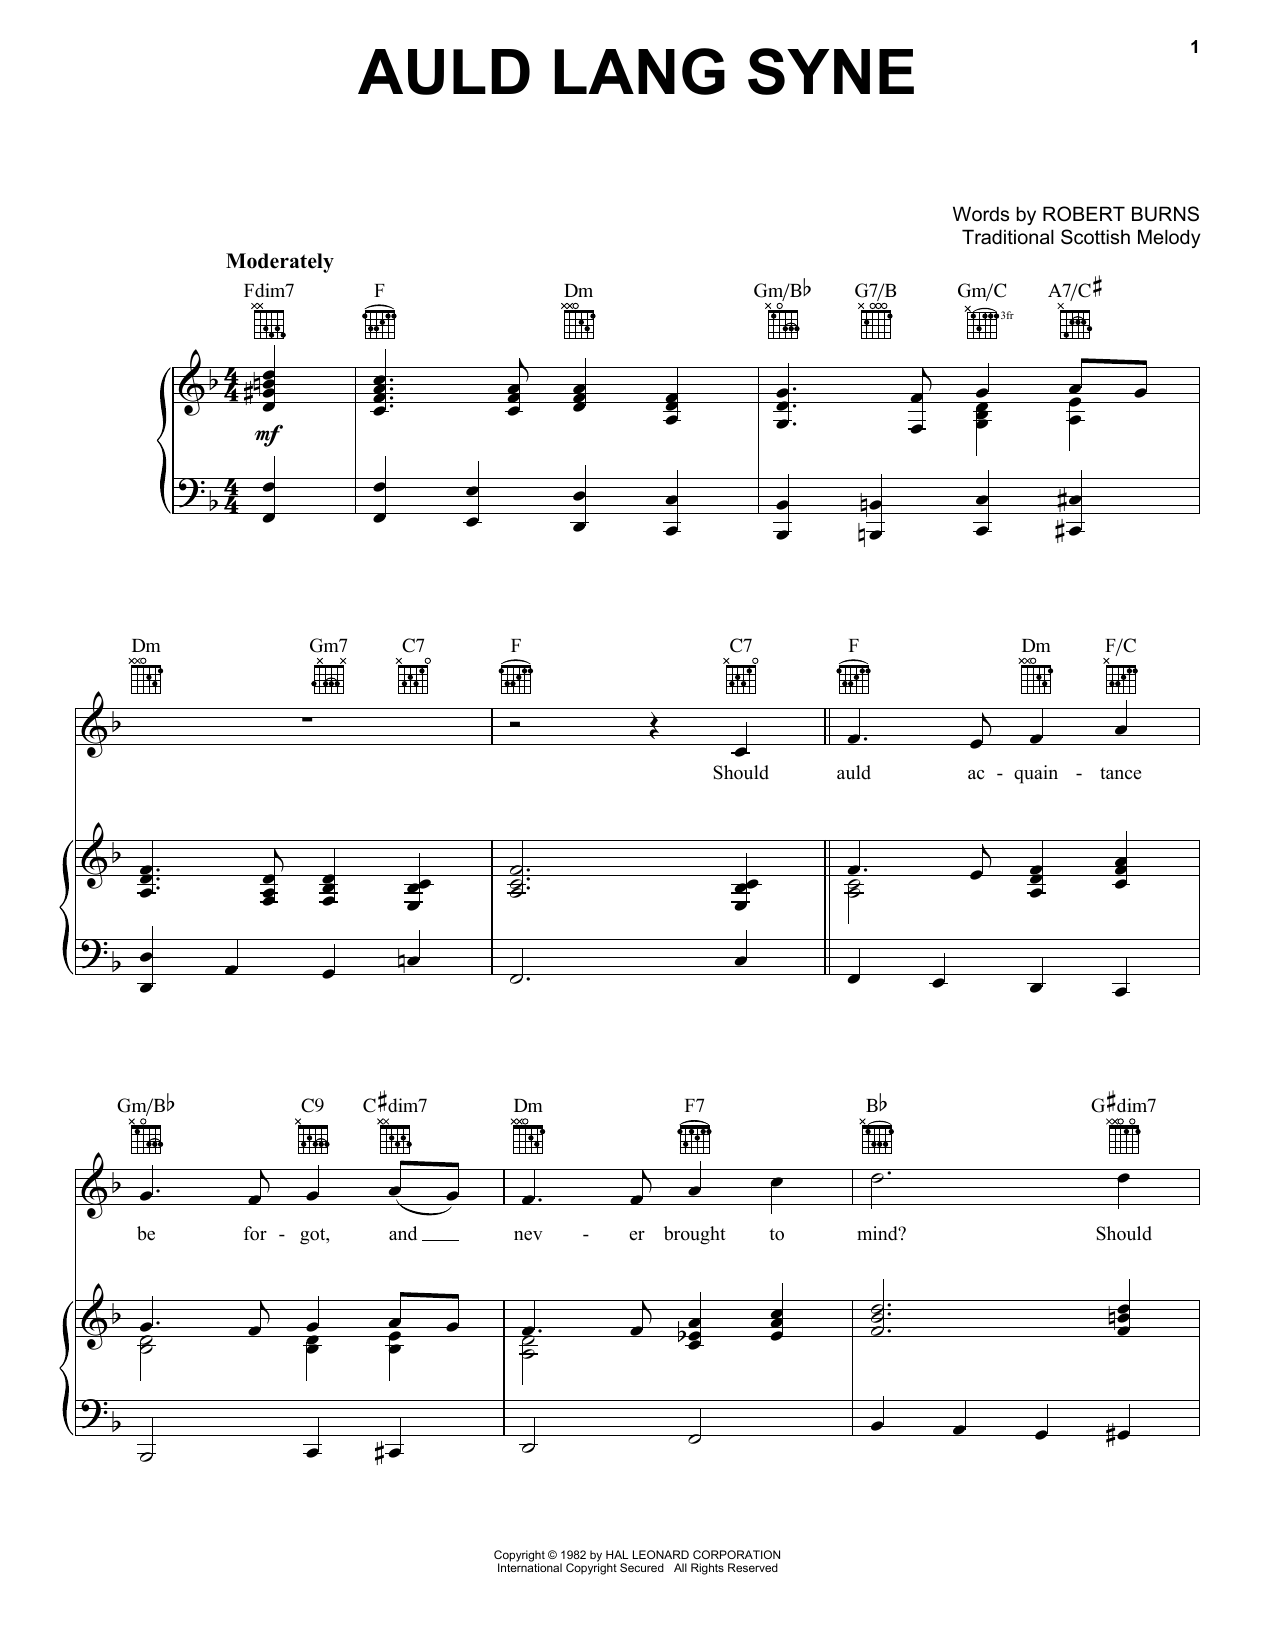 Traditional Auld Lang Syne Sheet Music